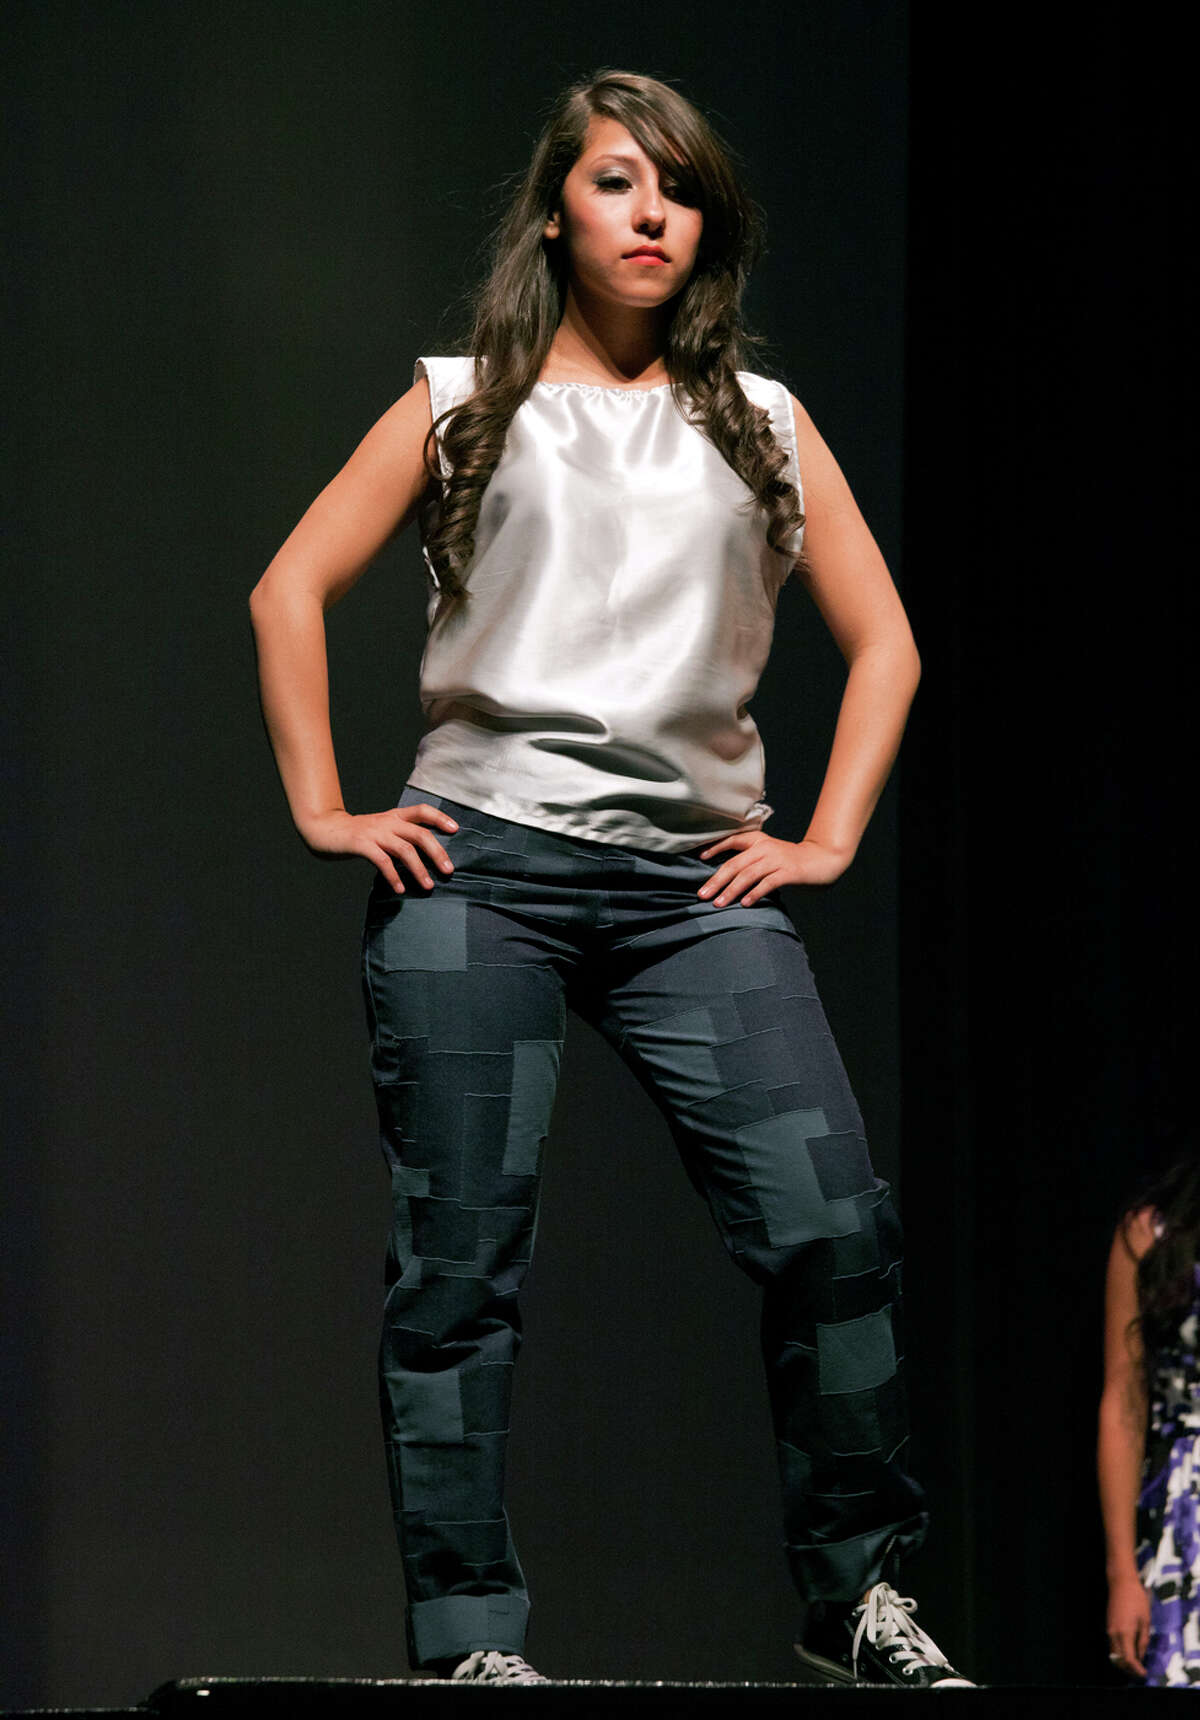 SA Life/HEIDBRINK A model wears a patched pants set by Maribel Esquivel, from the Senior Collections, at the Thomas Jefferson High School 11th Annual "All That Style" 2012 Fashion Show. Photo by Jamie Karutz.